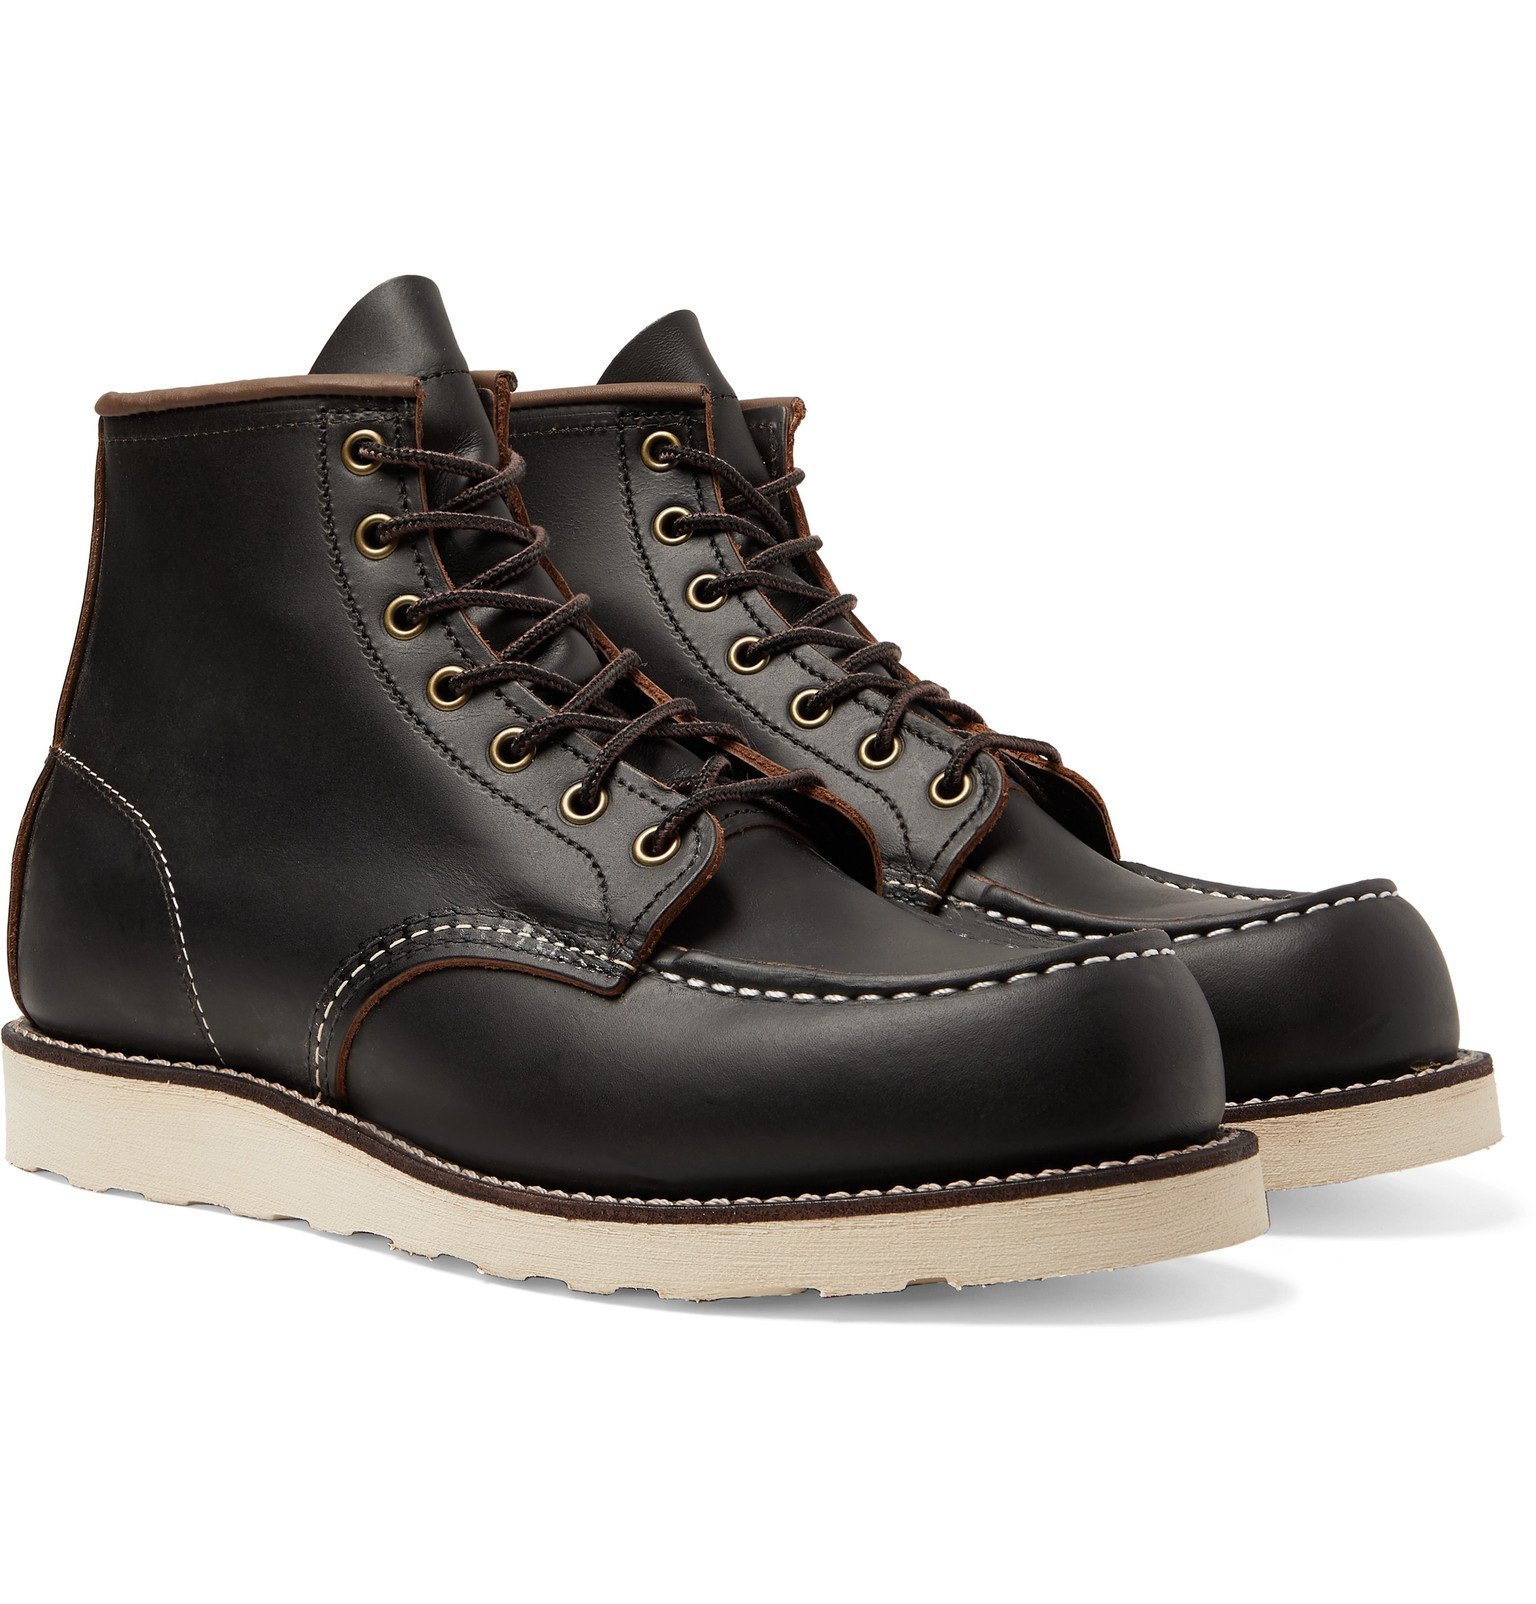 Red Wing Shoes - 8849 6-Inch Moc Leather Boots - Black Red Wing Shoes